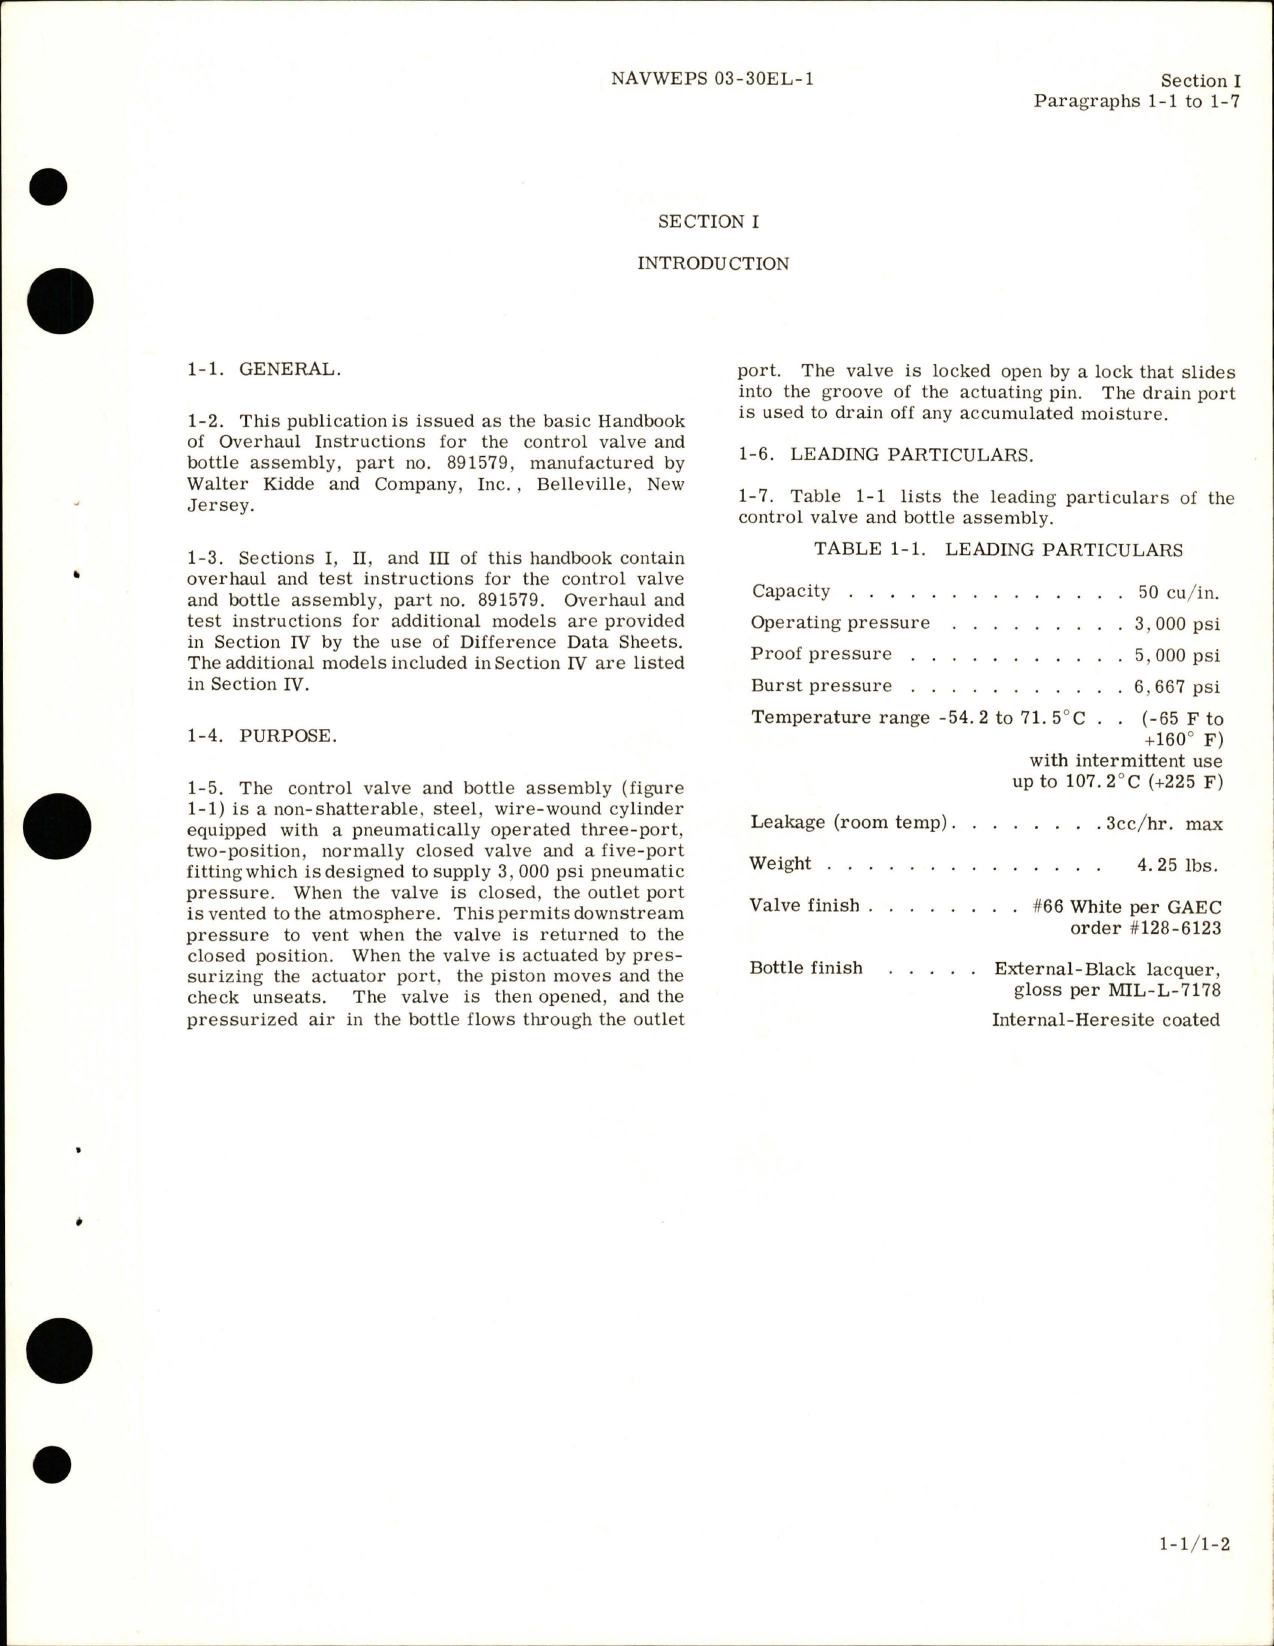 Sample page 5 from AirCorps Library document: Overhaul Instructions for Control Valve and Bottle Assembly - Part 891579